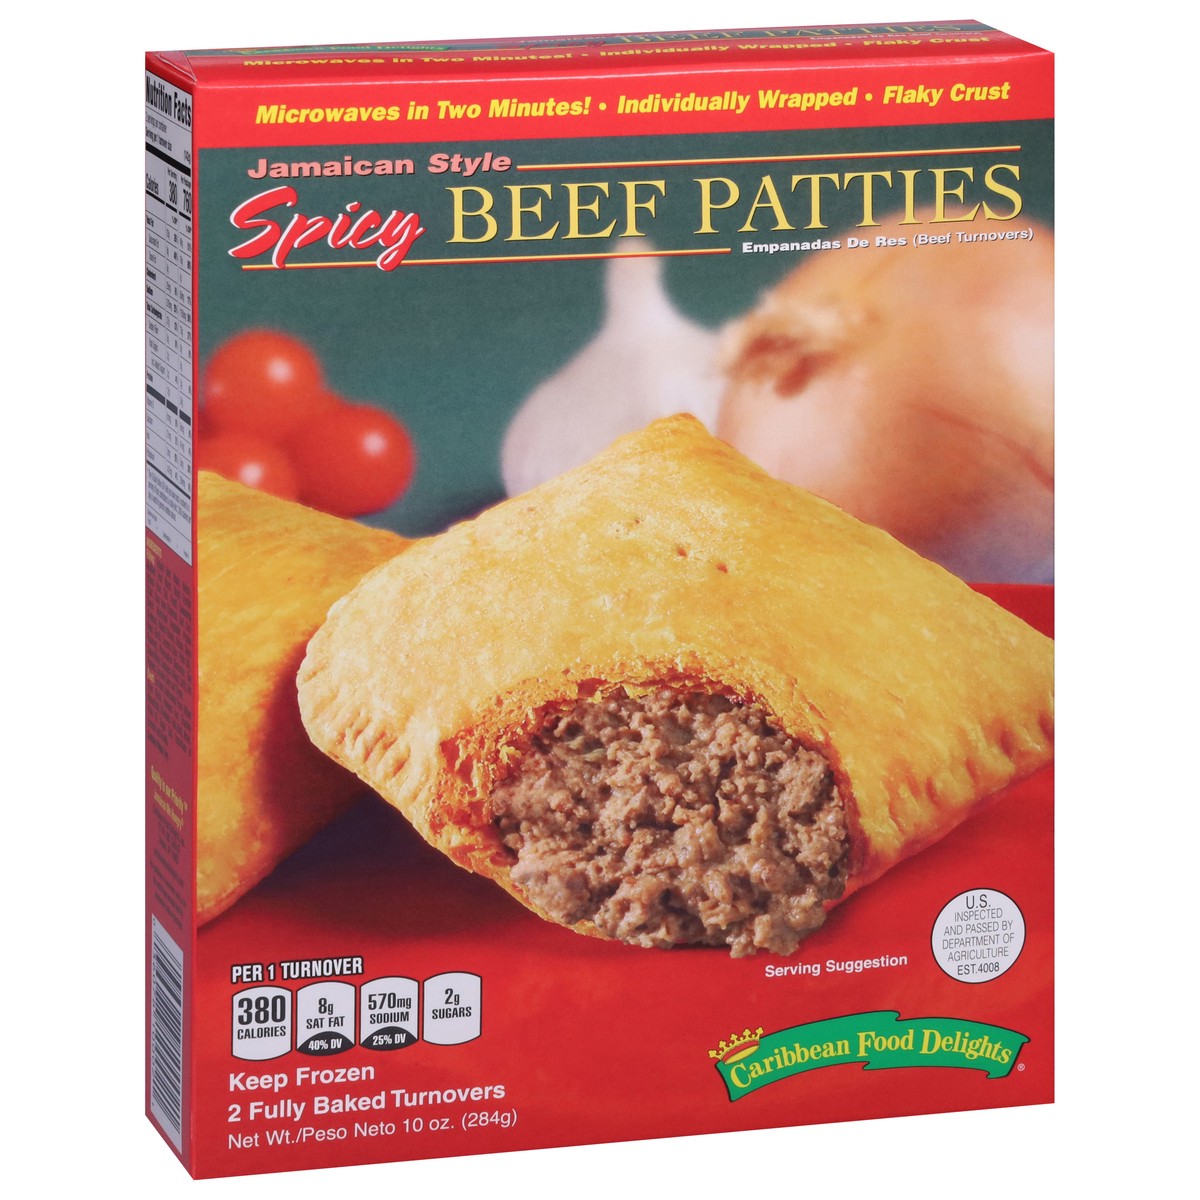 slide 8 of 17, Caribbean Food Delights Jamaican Style Spicy Beef Patties Turnovers 2 ea, 2 ct